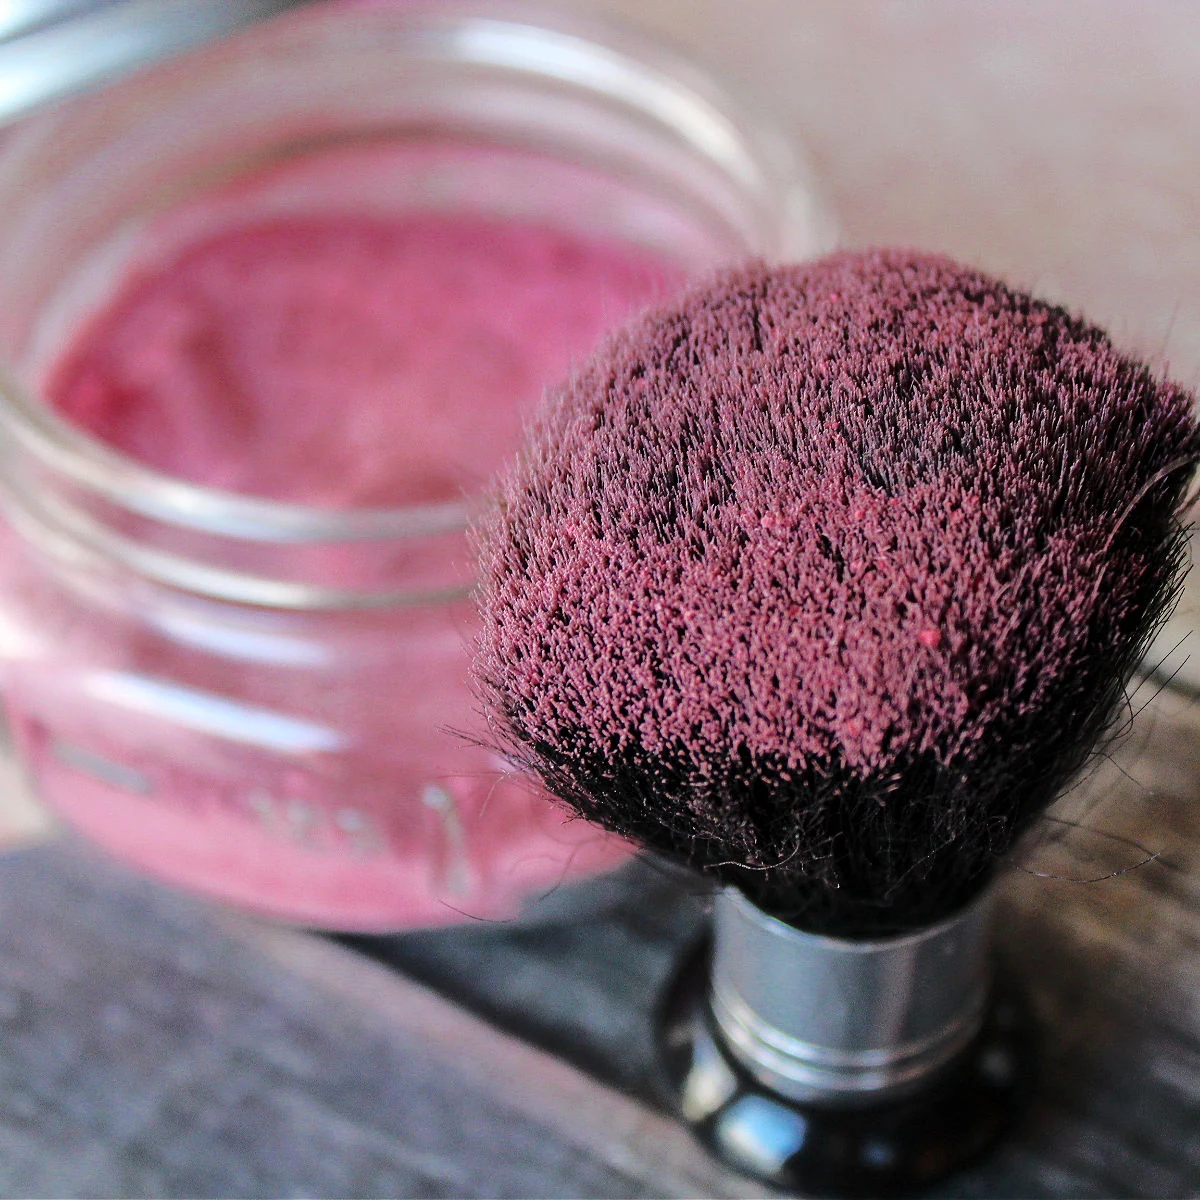 Close up of homemade organic blush made with edible food ingredients